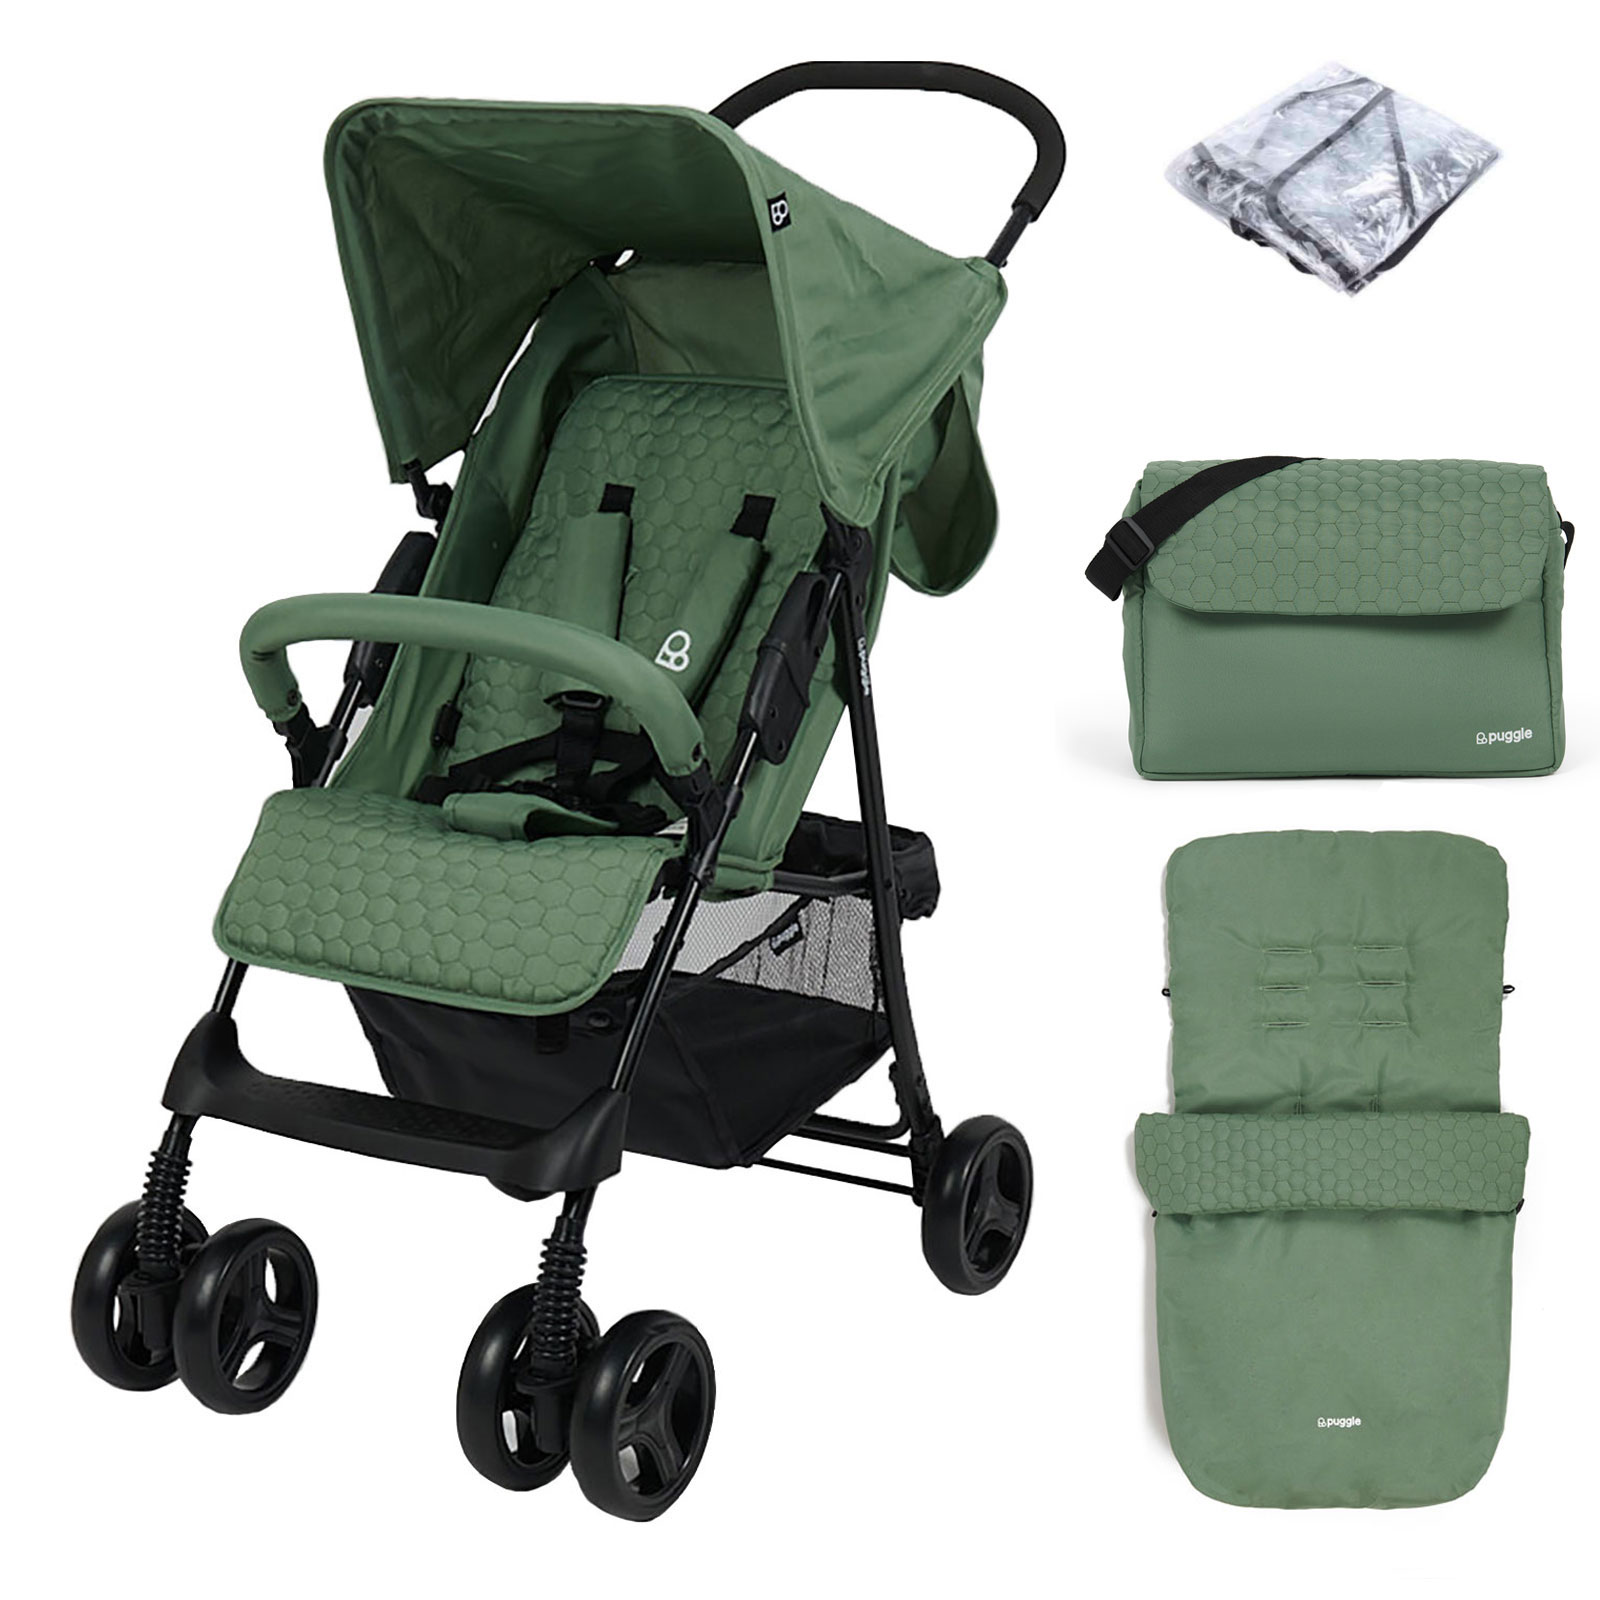 Puggle Holiday Luxe Pushchair Stroller with Raincover, Universal Footmuff, Changing Bag and Mat – Sage Green